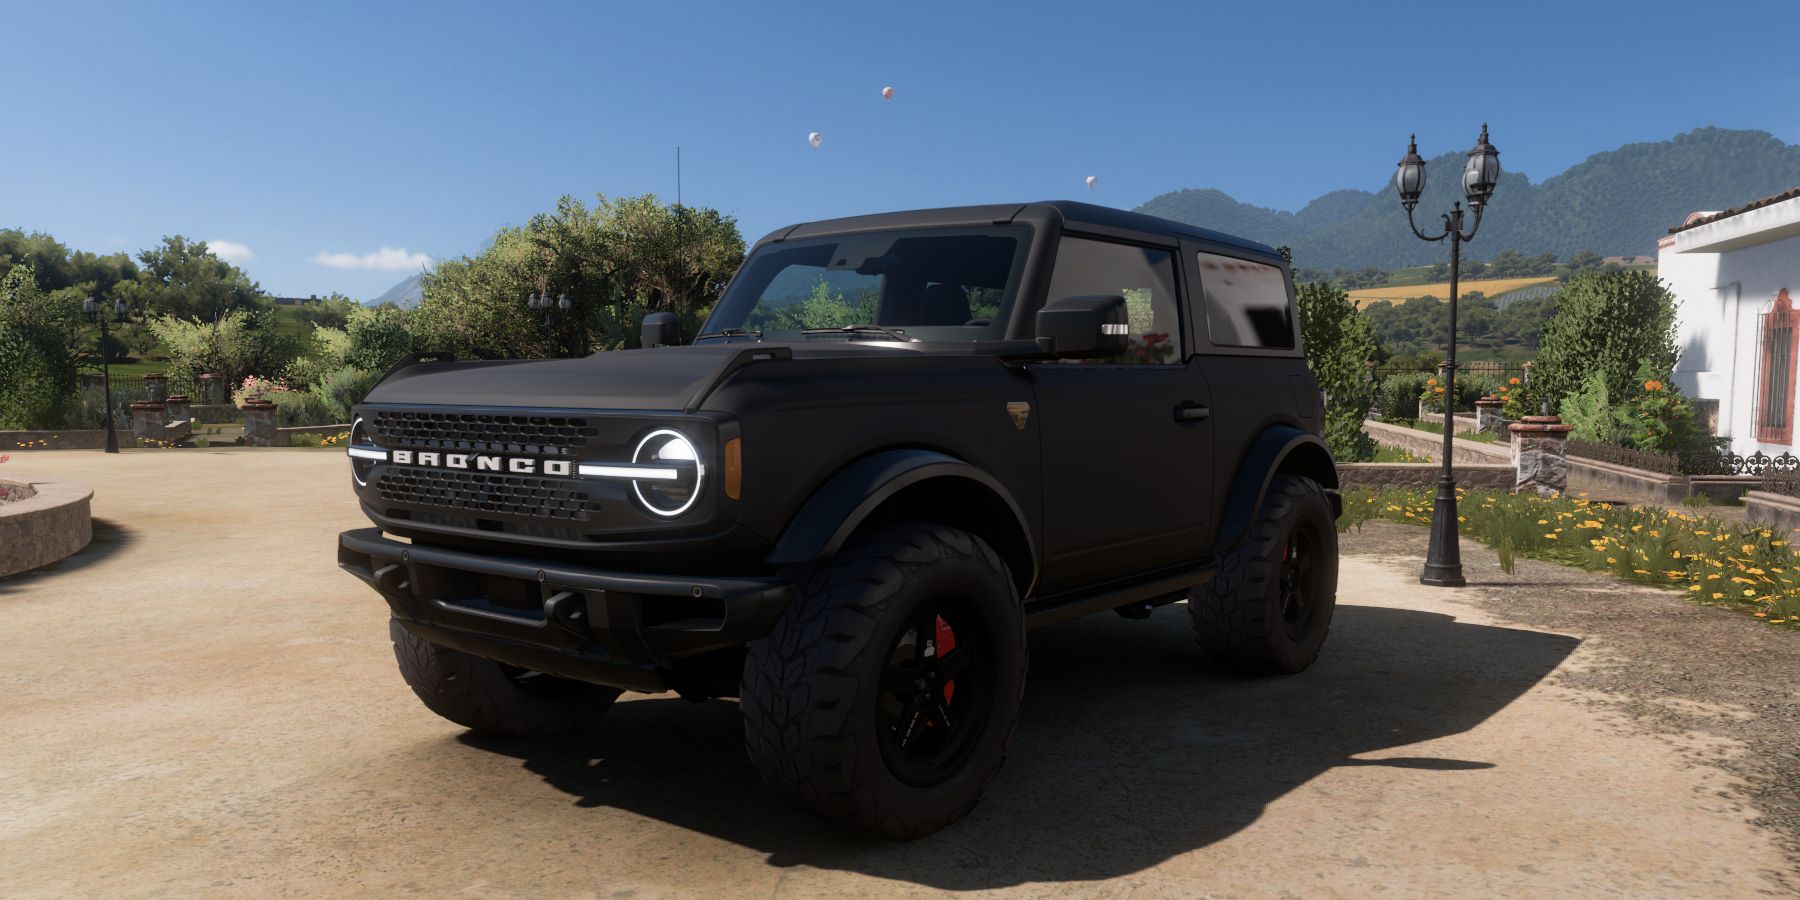 A 2021 Ford Bronco in Forza Horizon 5